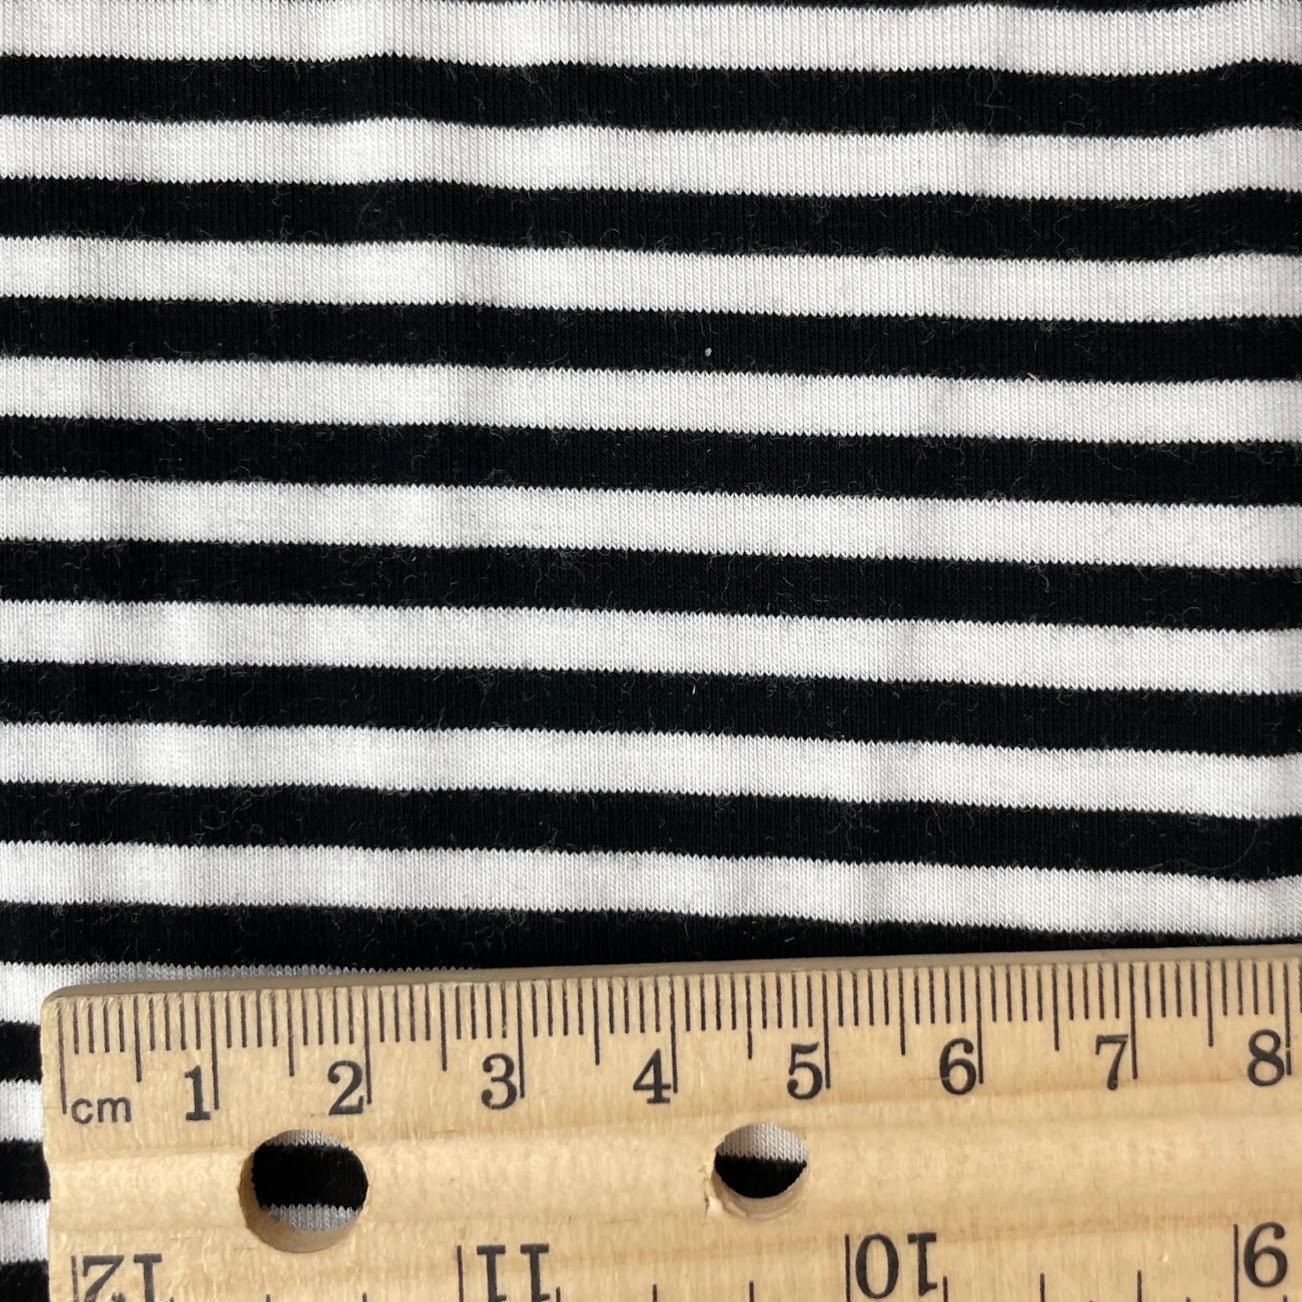 Bamboo Stretch Jersey Knit - Black and White Stripes - Yarn Dyed - Deadstock - 250gsm